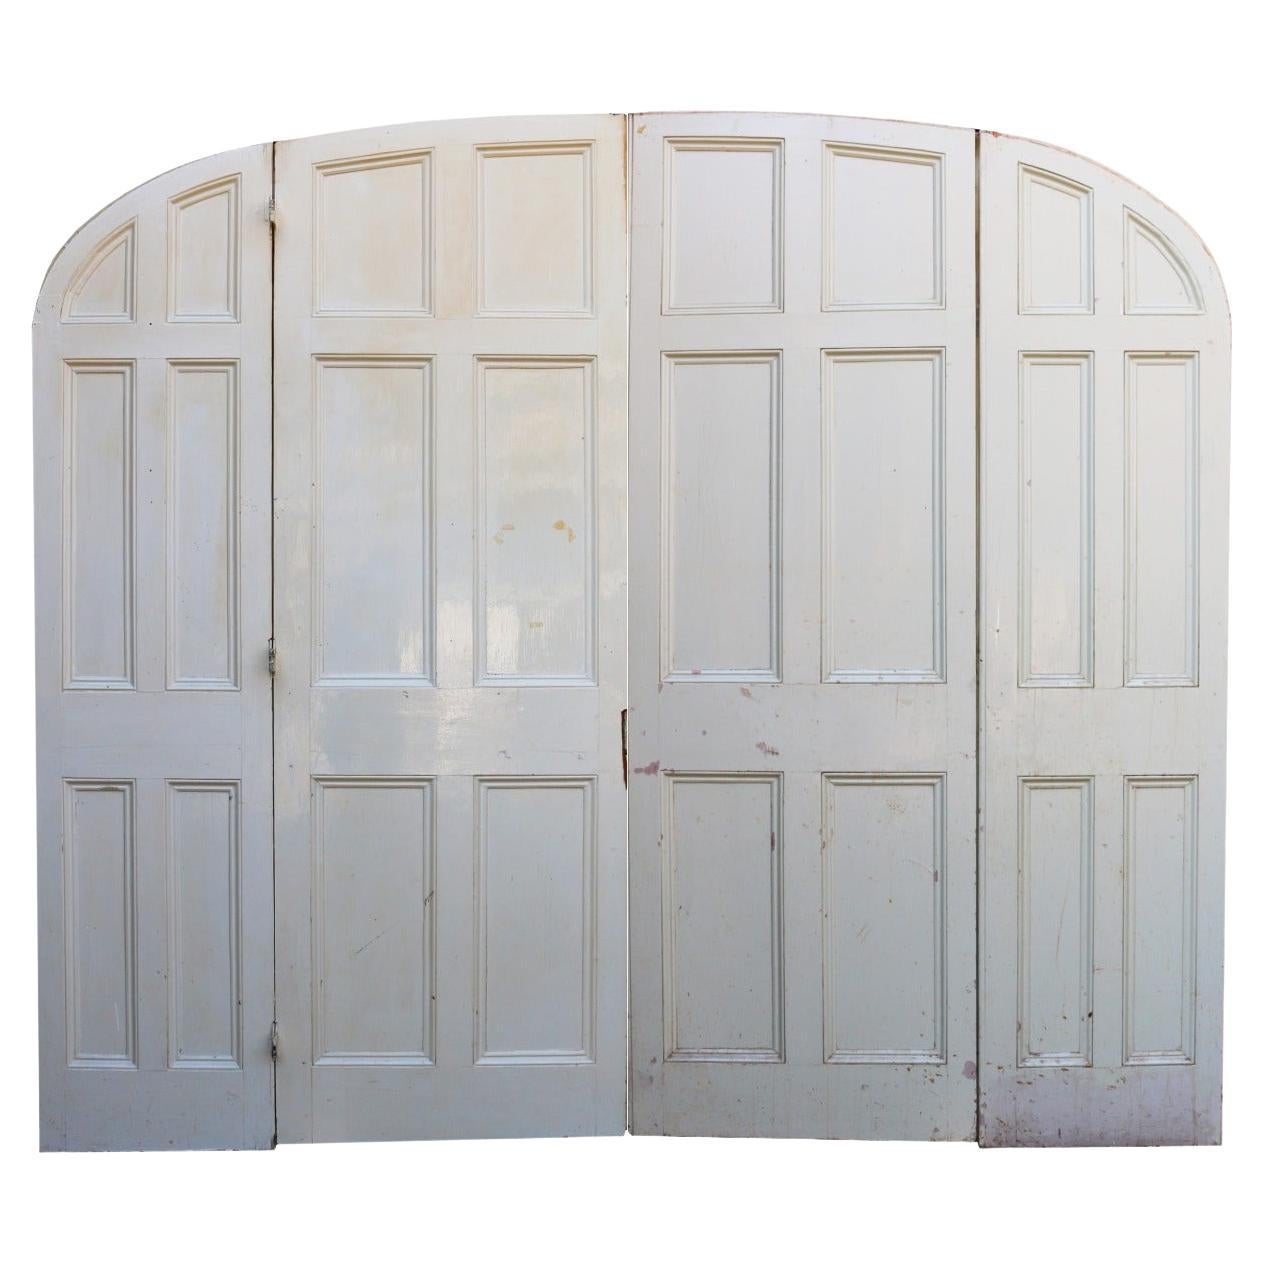 Set of Four Reclaimed Arched Room Dividing Doors